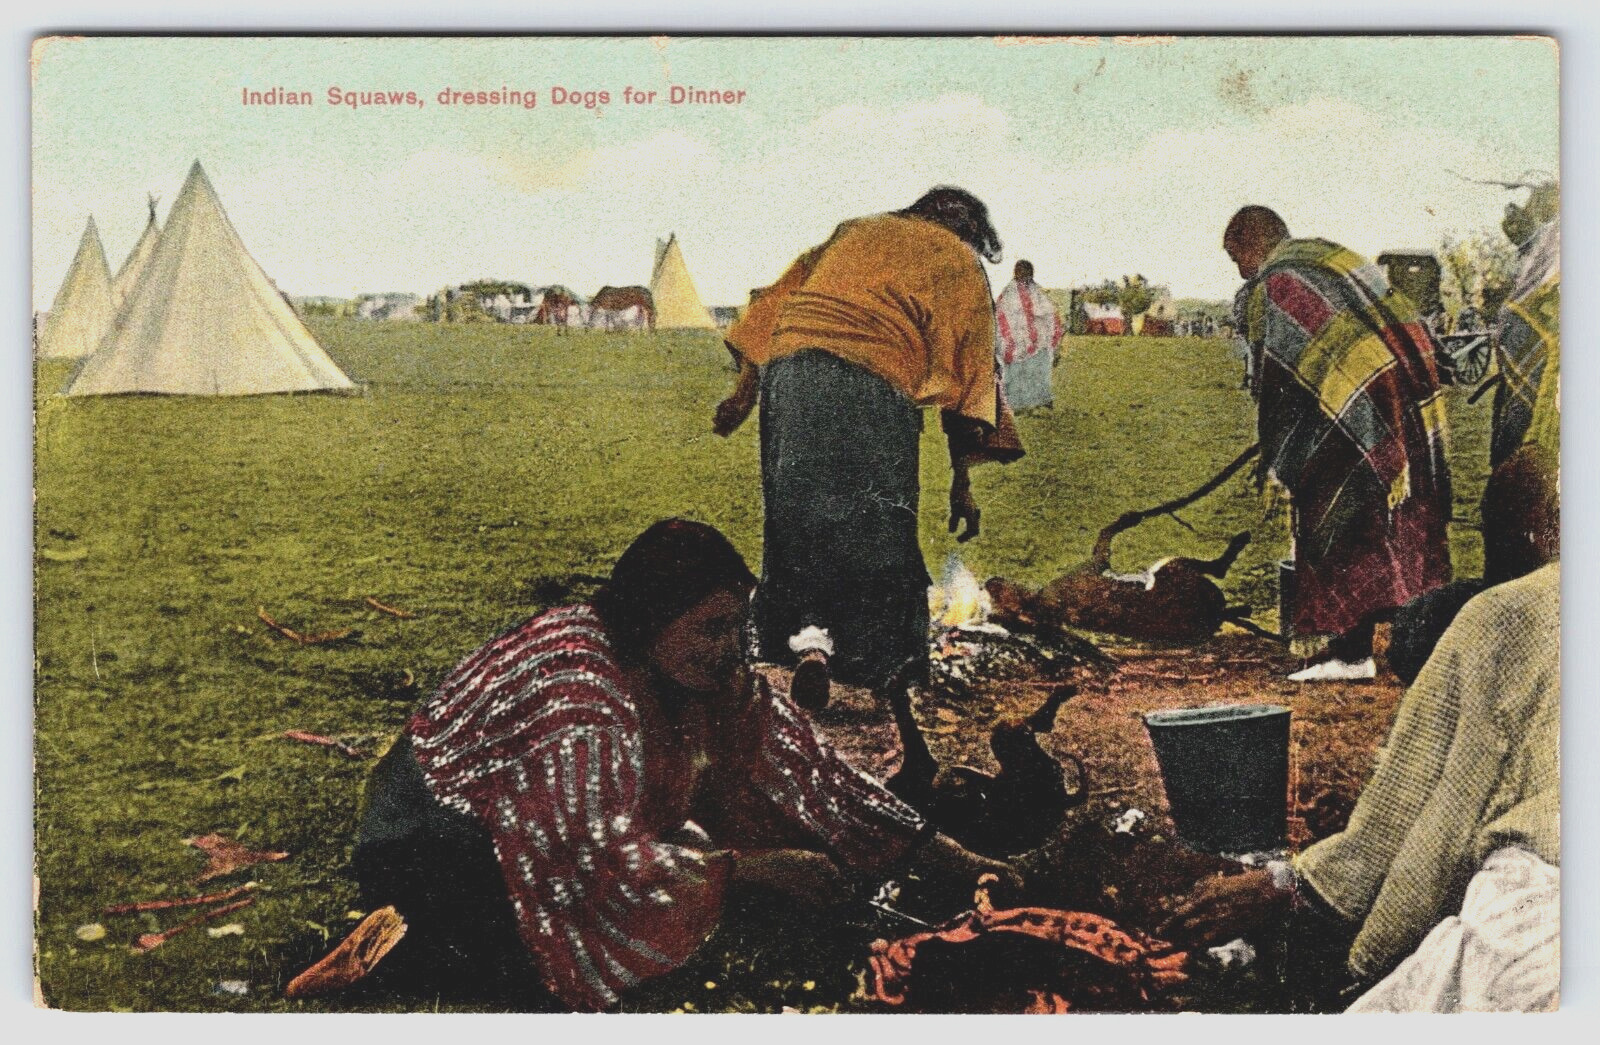 1911 Montana Postcard Native American Indian Squaw Dressing Dogs For Dinner